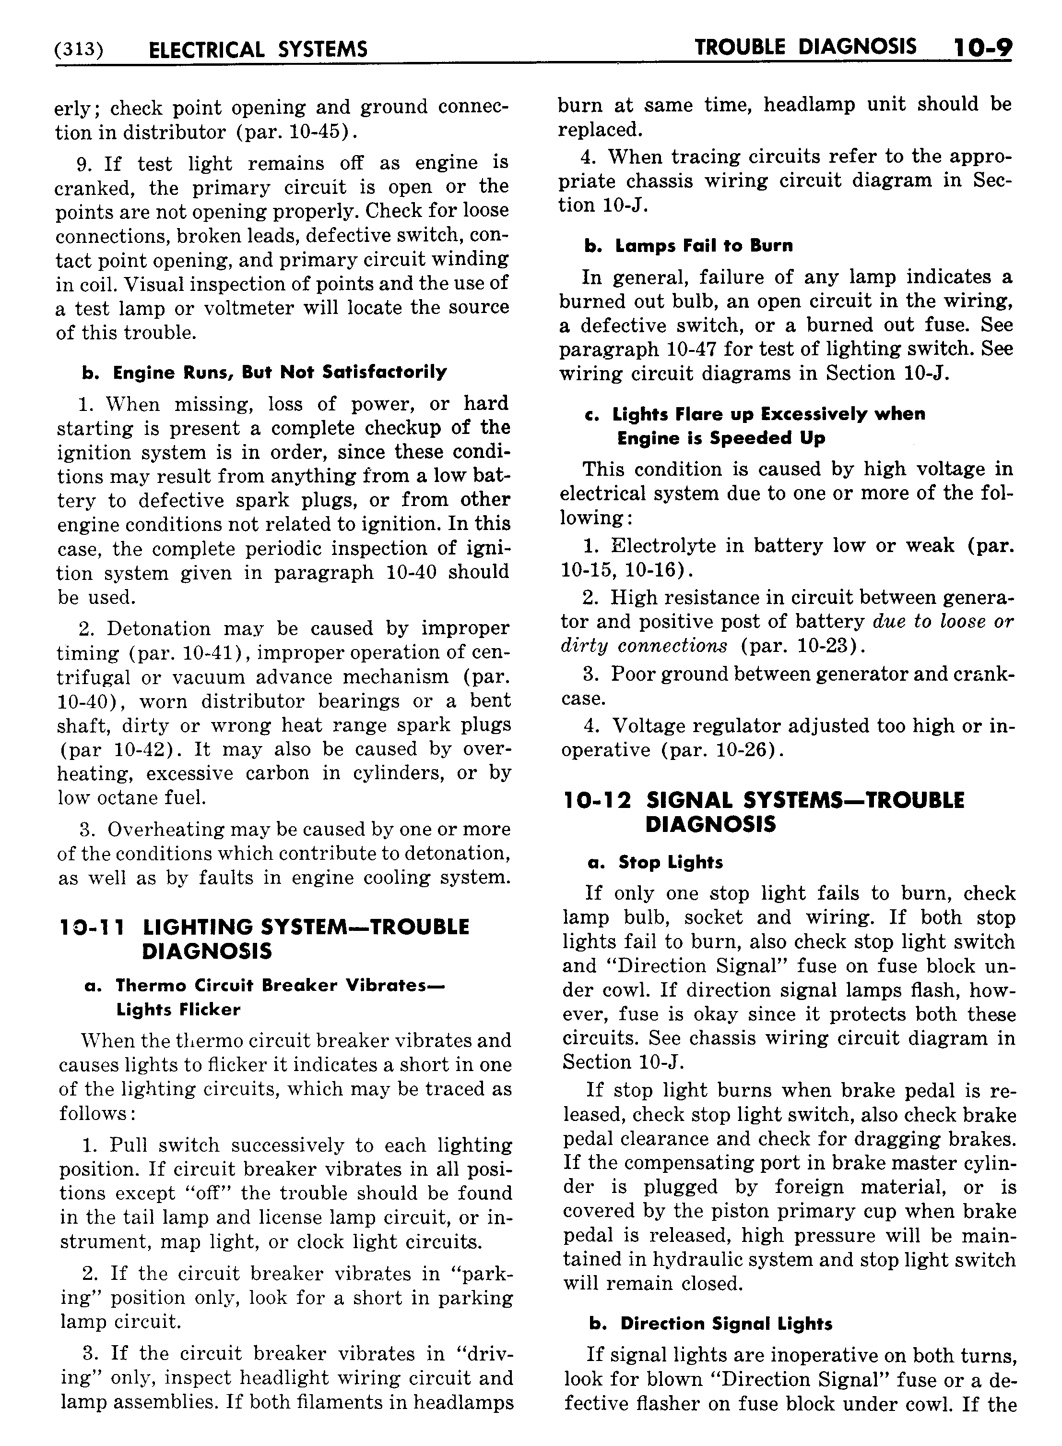 n_11 1955 Buick Shop Manual - Electrical Systems-009-009.jpg